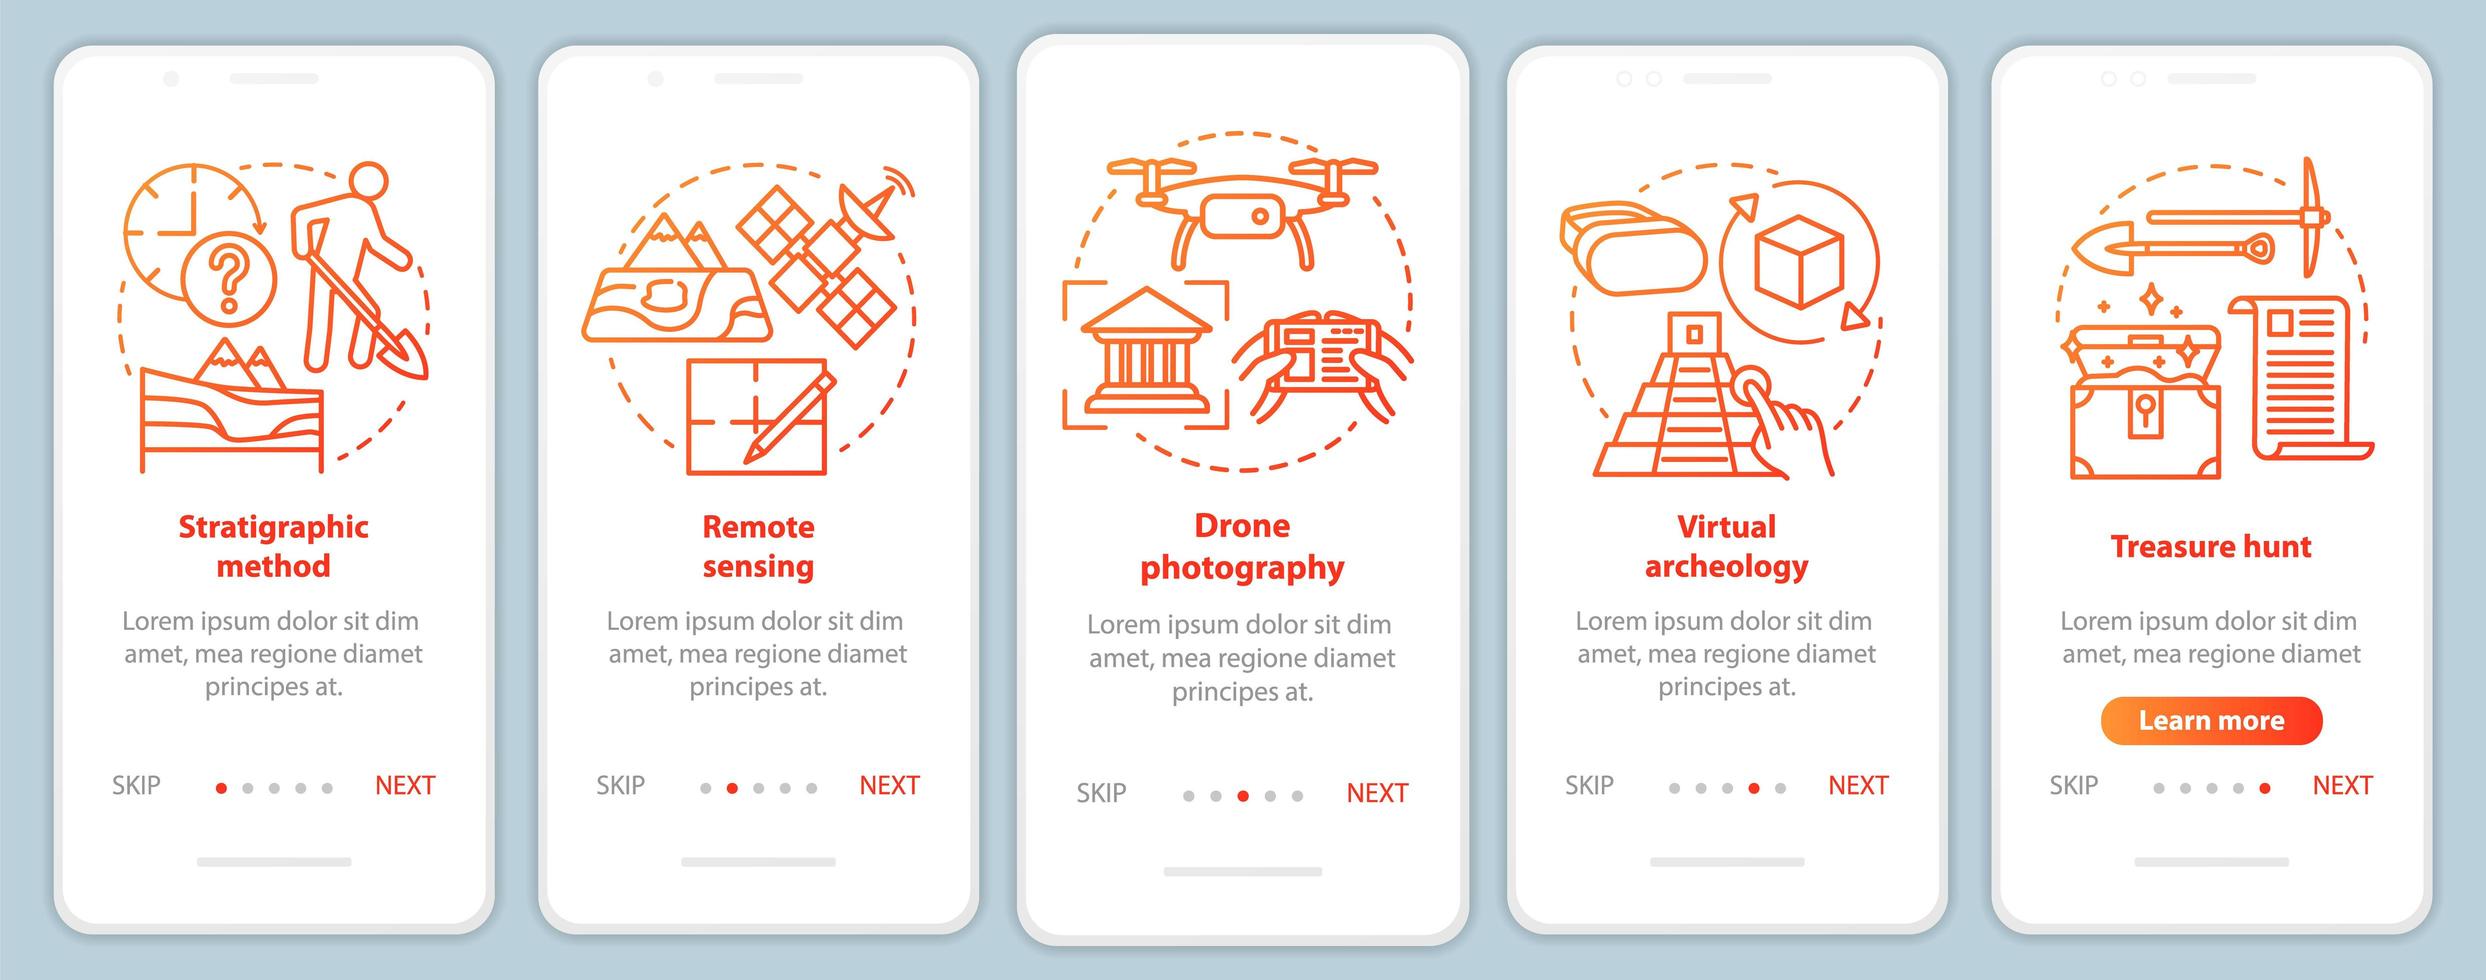 Archeology methods onboarding mobile app page screen vector template.